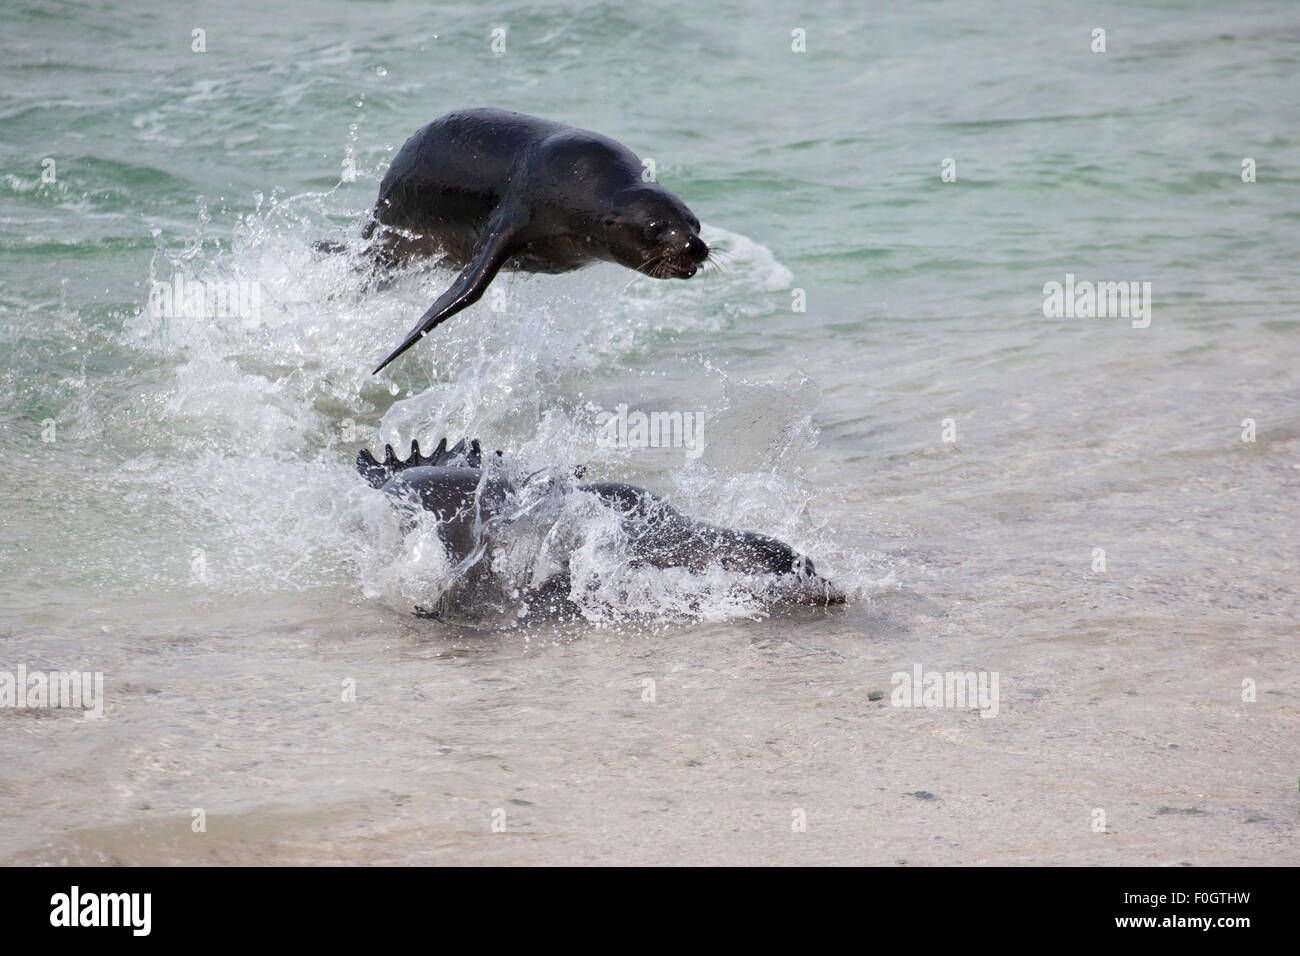 Playful Galapagos Sea Lions (Zalophus wollebaeki) surfing in the Pacific Ocean, one animal jumping over the other Stock Photo